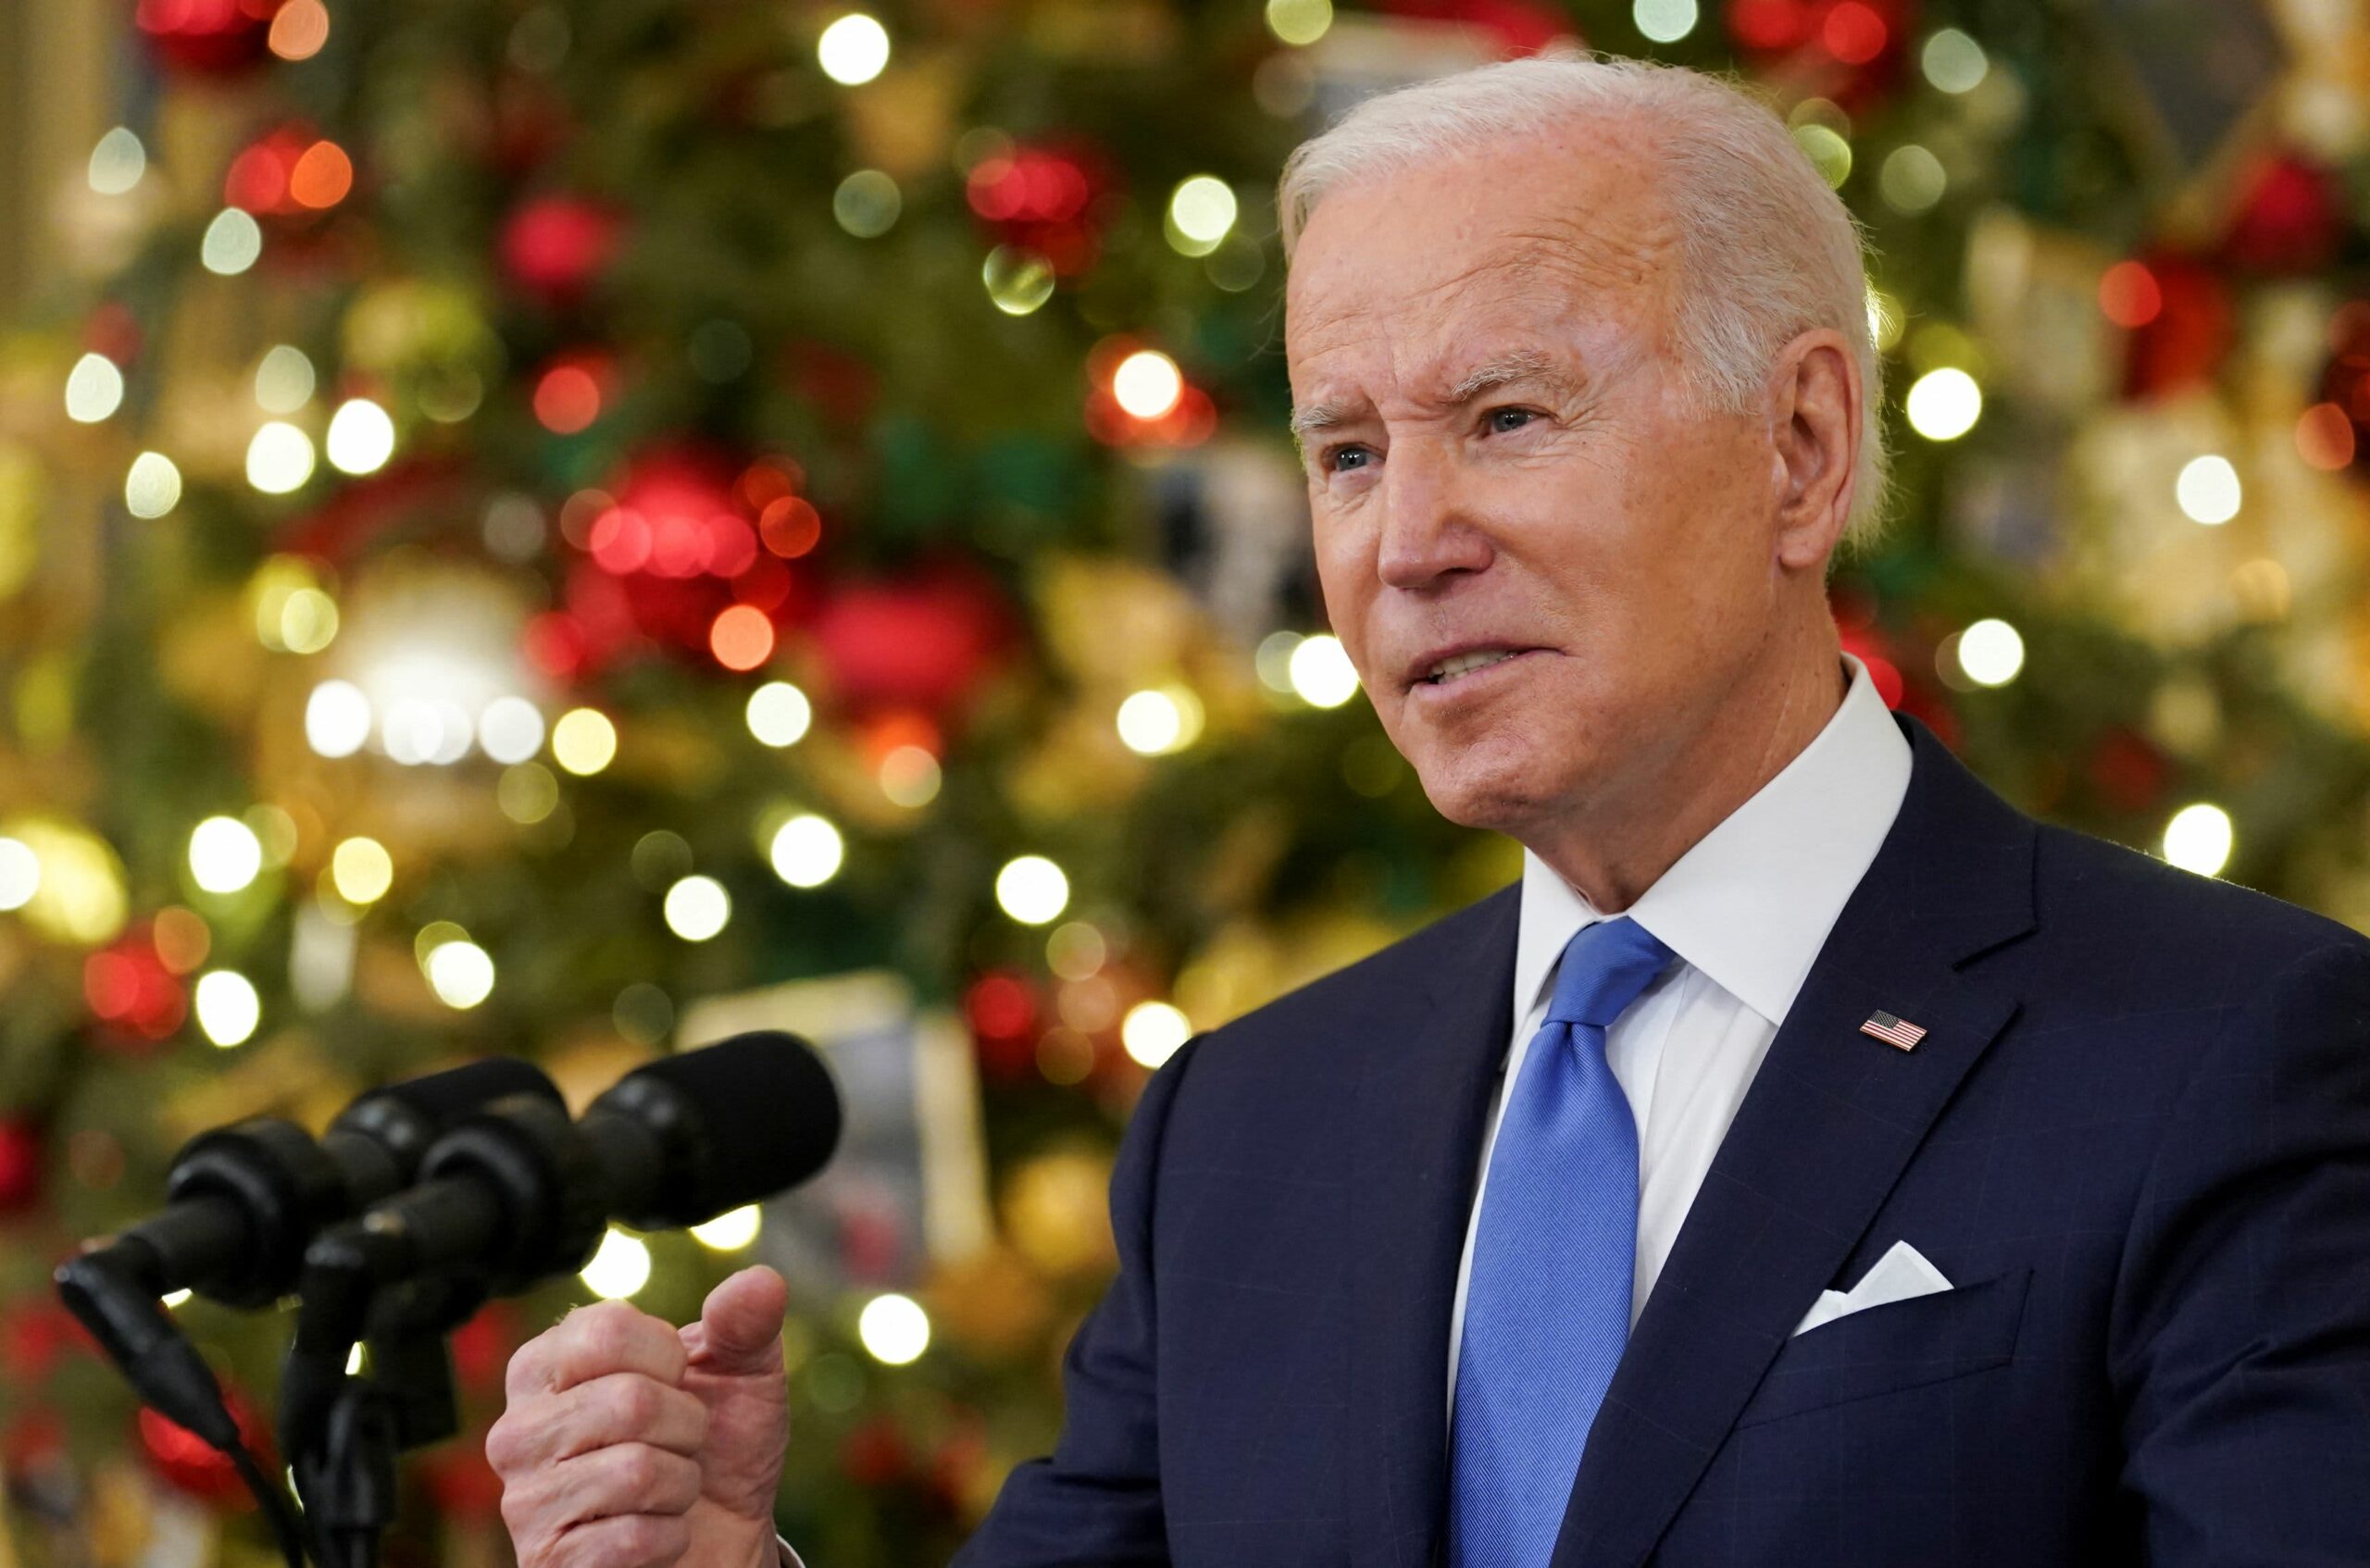 Biden says vaccinated can safely celebrate holidays as omicron spreads